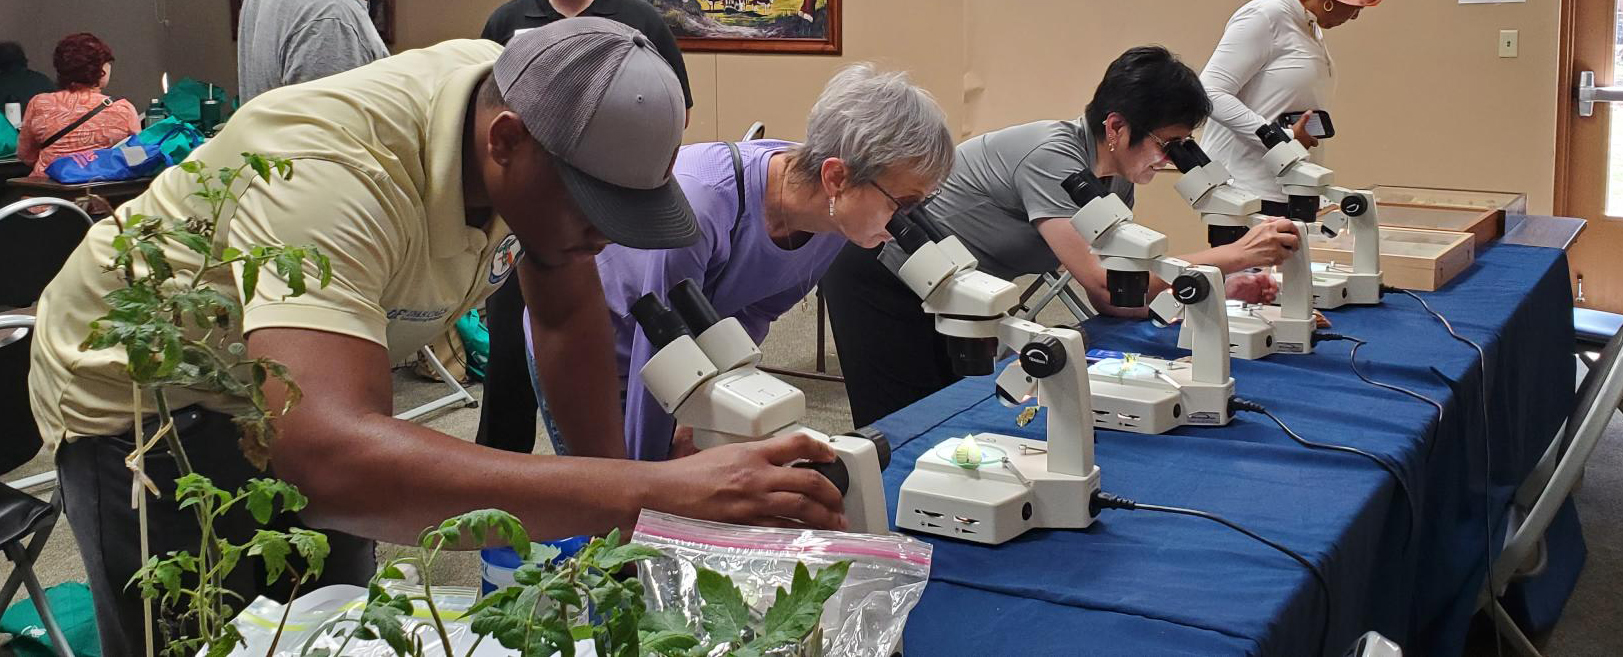 Three people looking through microscopes at workshop event